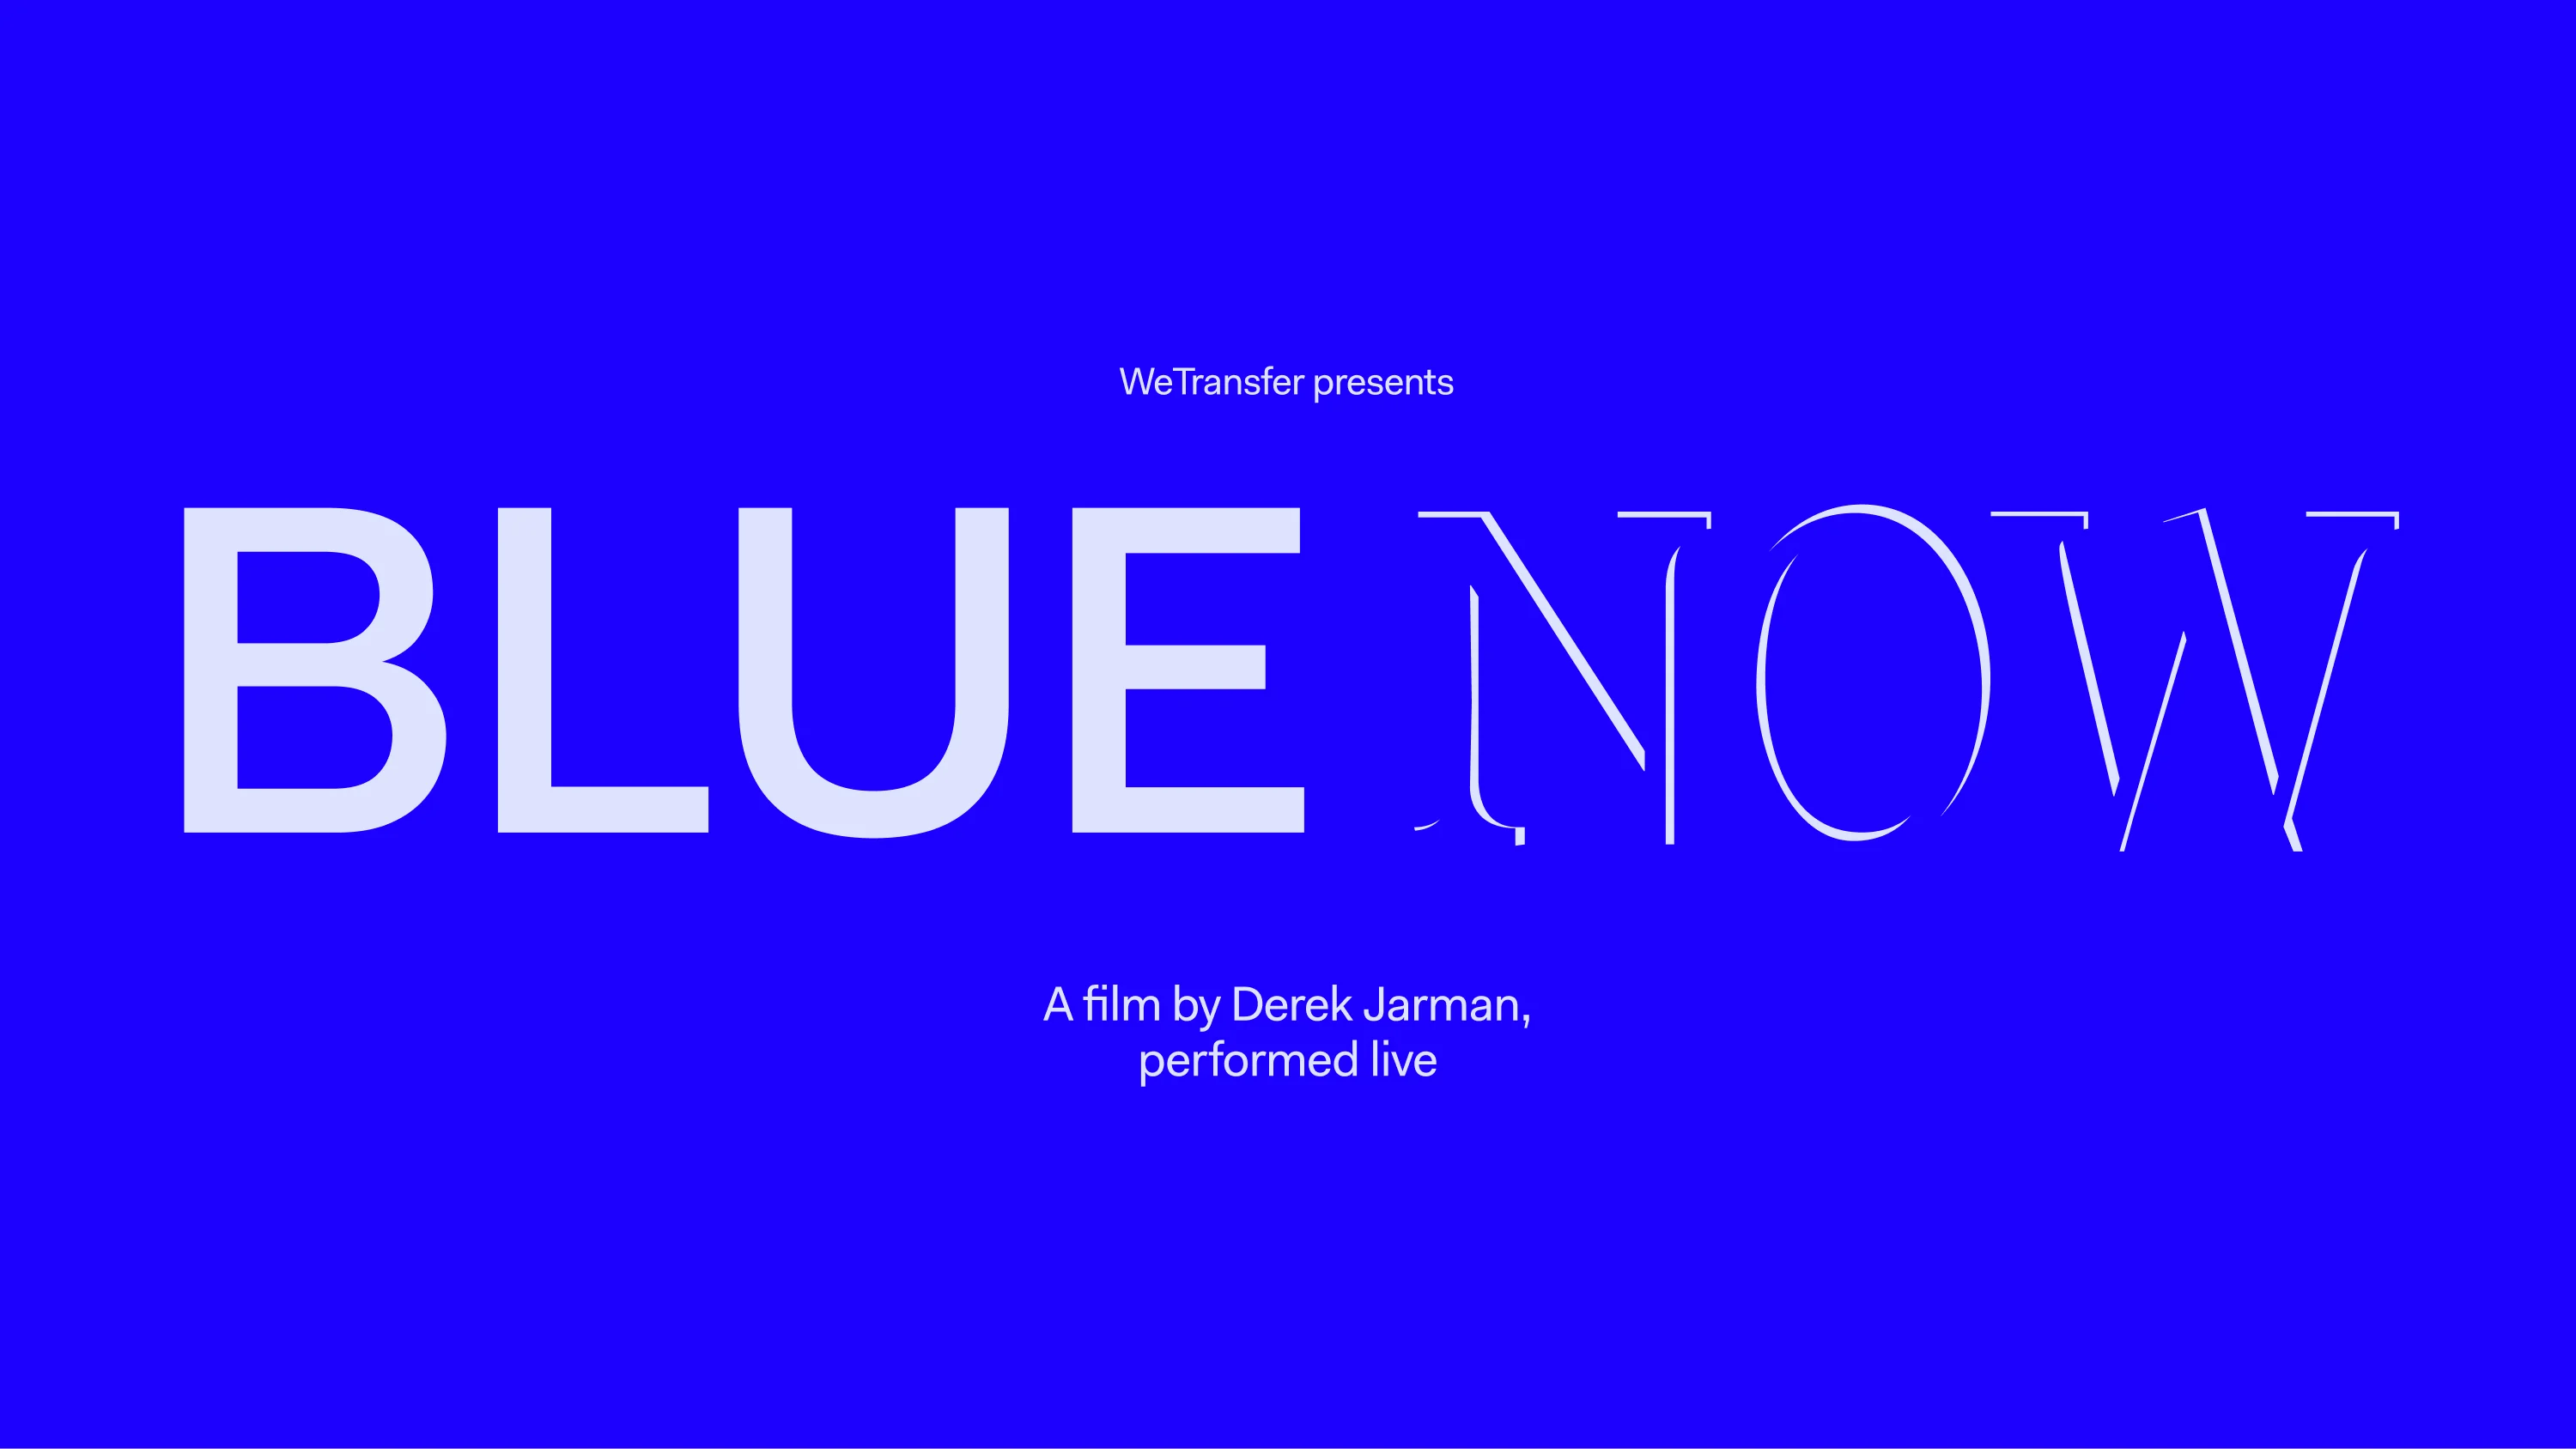 Cover Image - BLUE NOW brighton event page